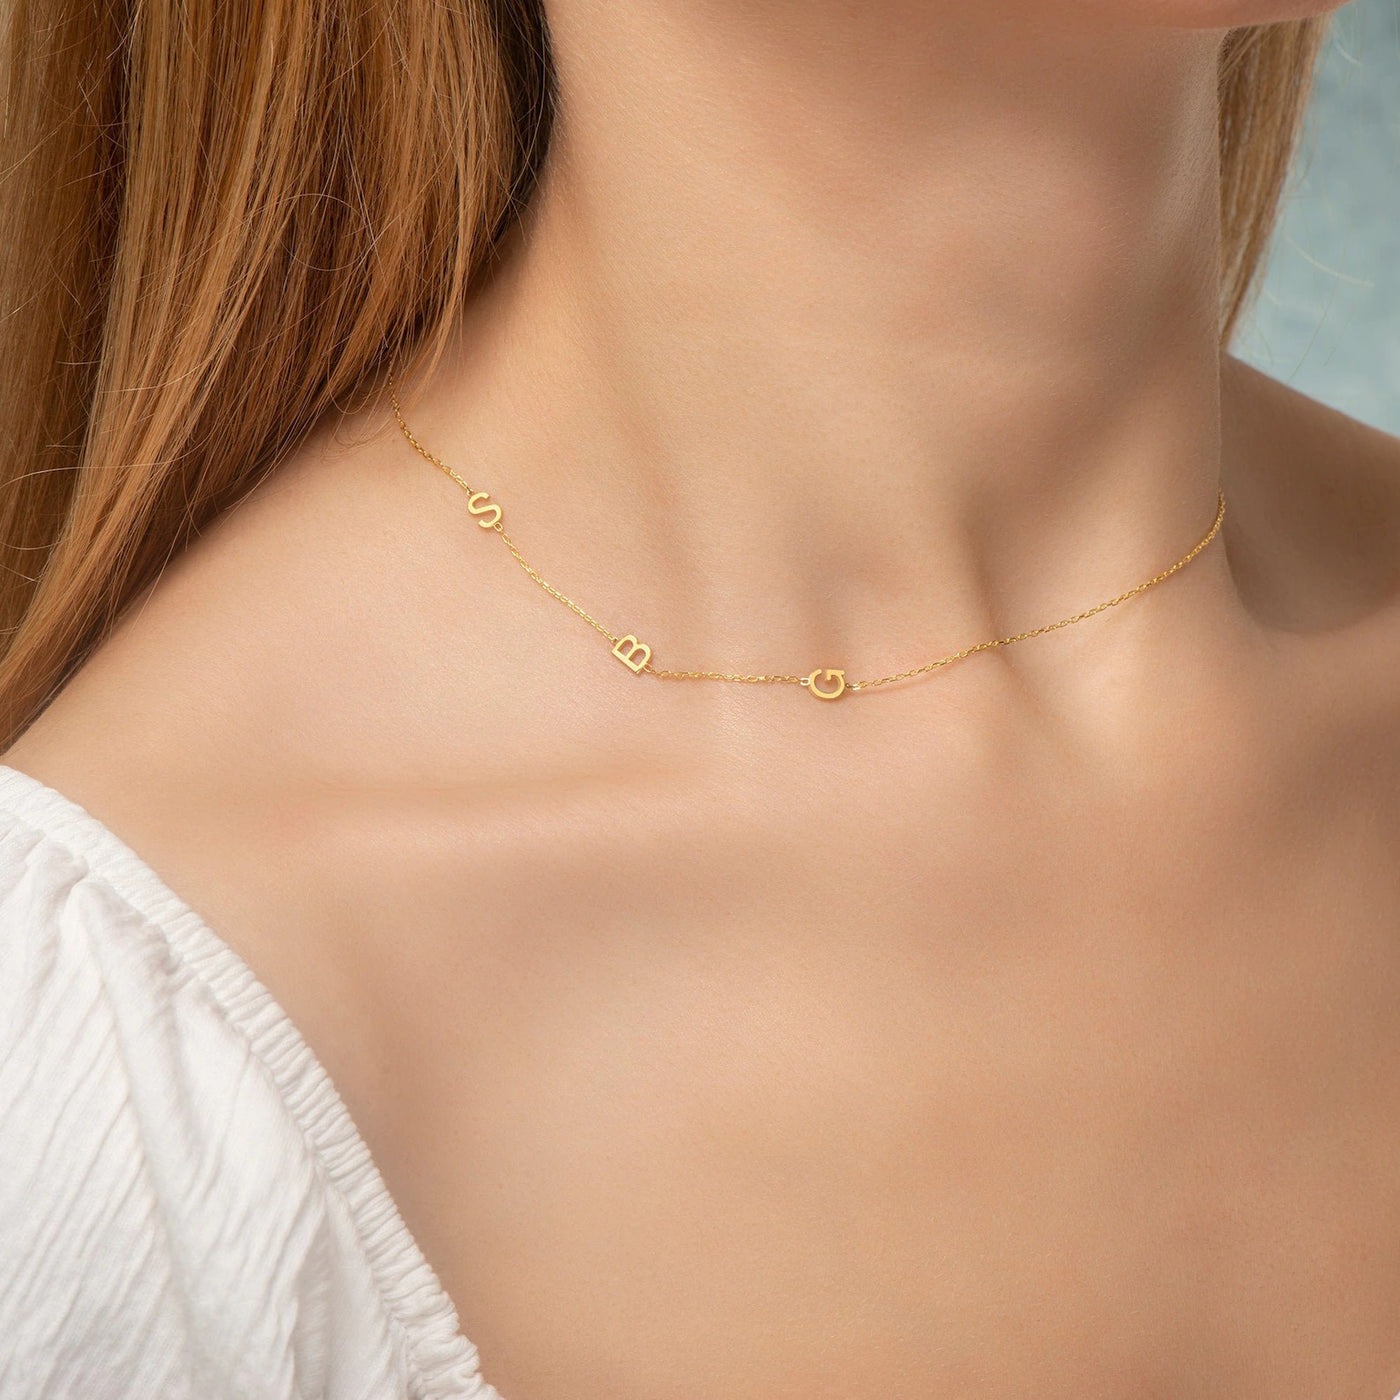 Sideways Initial Necklace - Any Letter Pendant 24k Gold Plated - oNecklace  ® | eBay